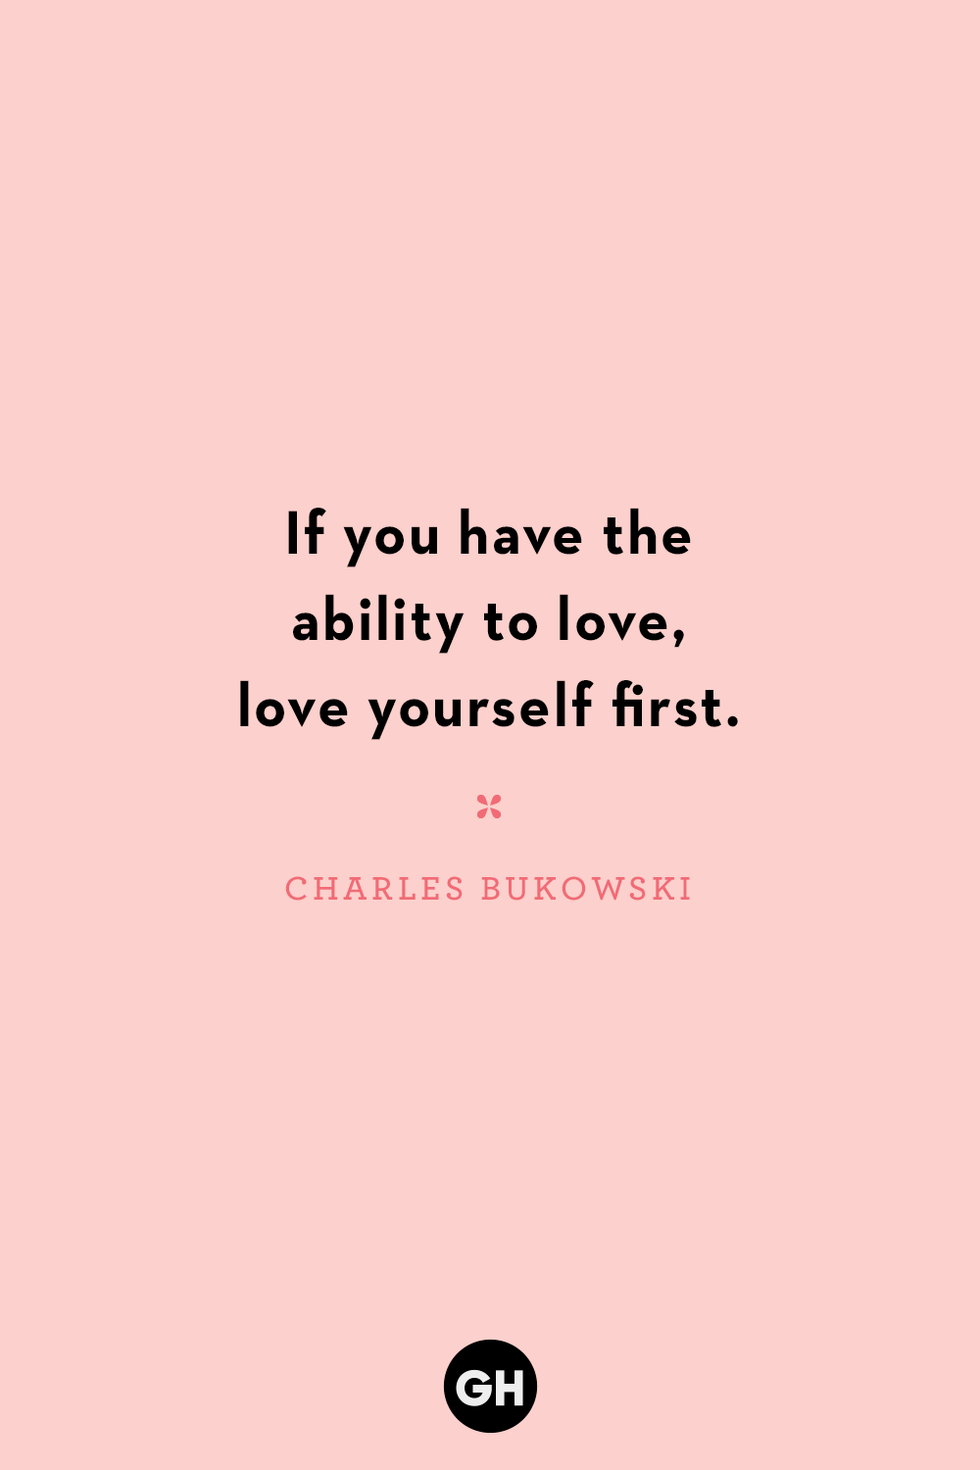 100 Best Self-Love Quotes to Empower You and Build Self-Esteem